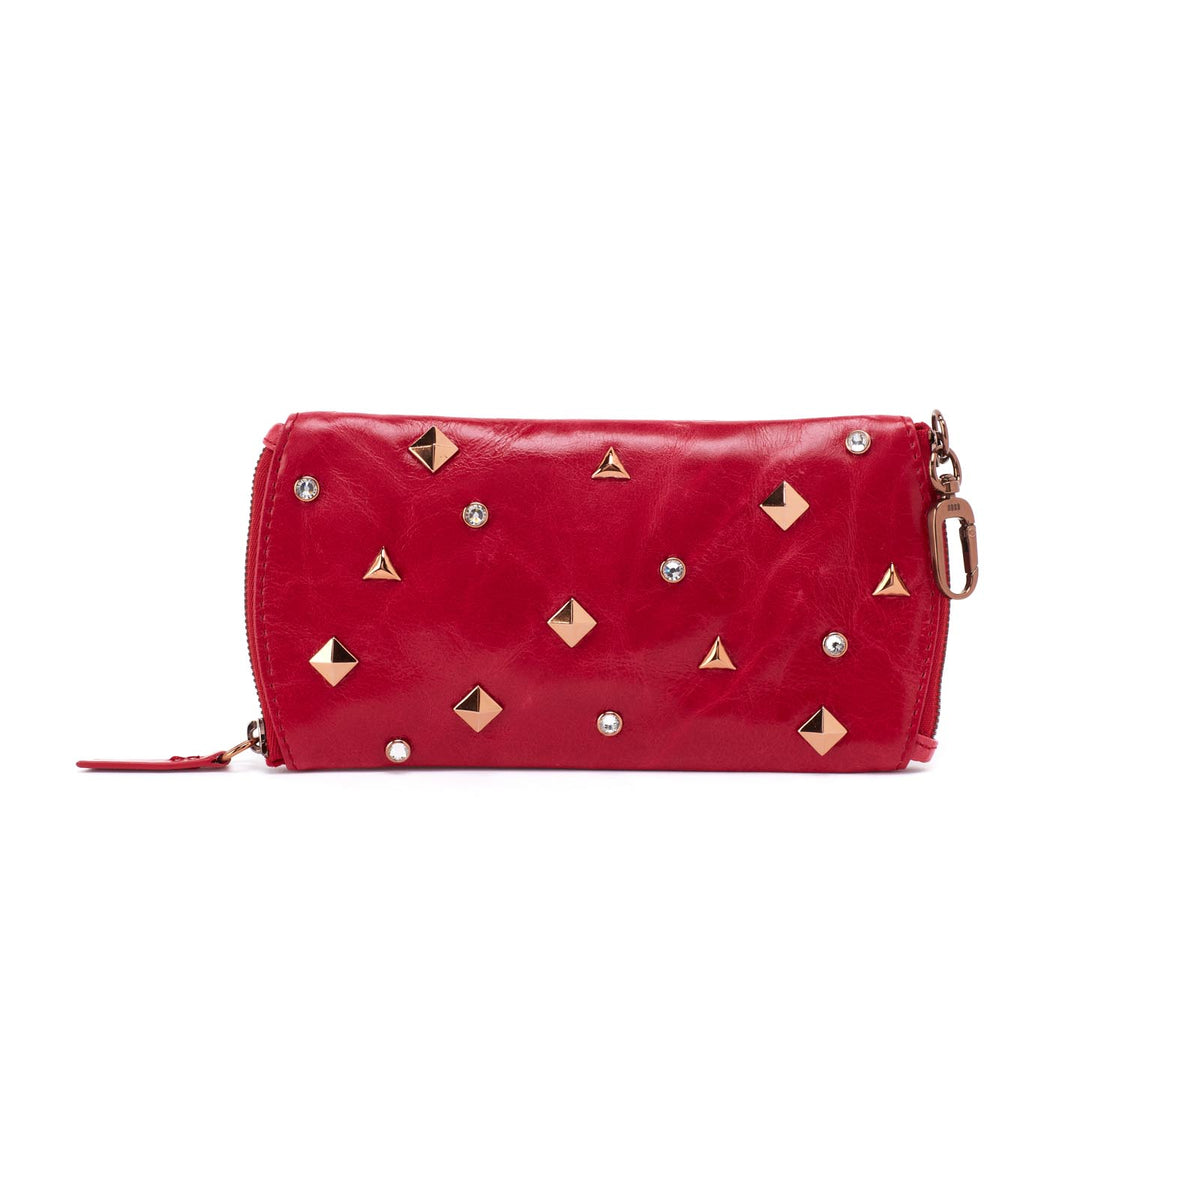 Hobo Spark Double Eyeglass Case, Claret with Studs - Statement Boutique